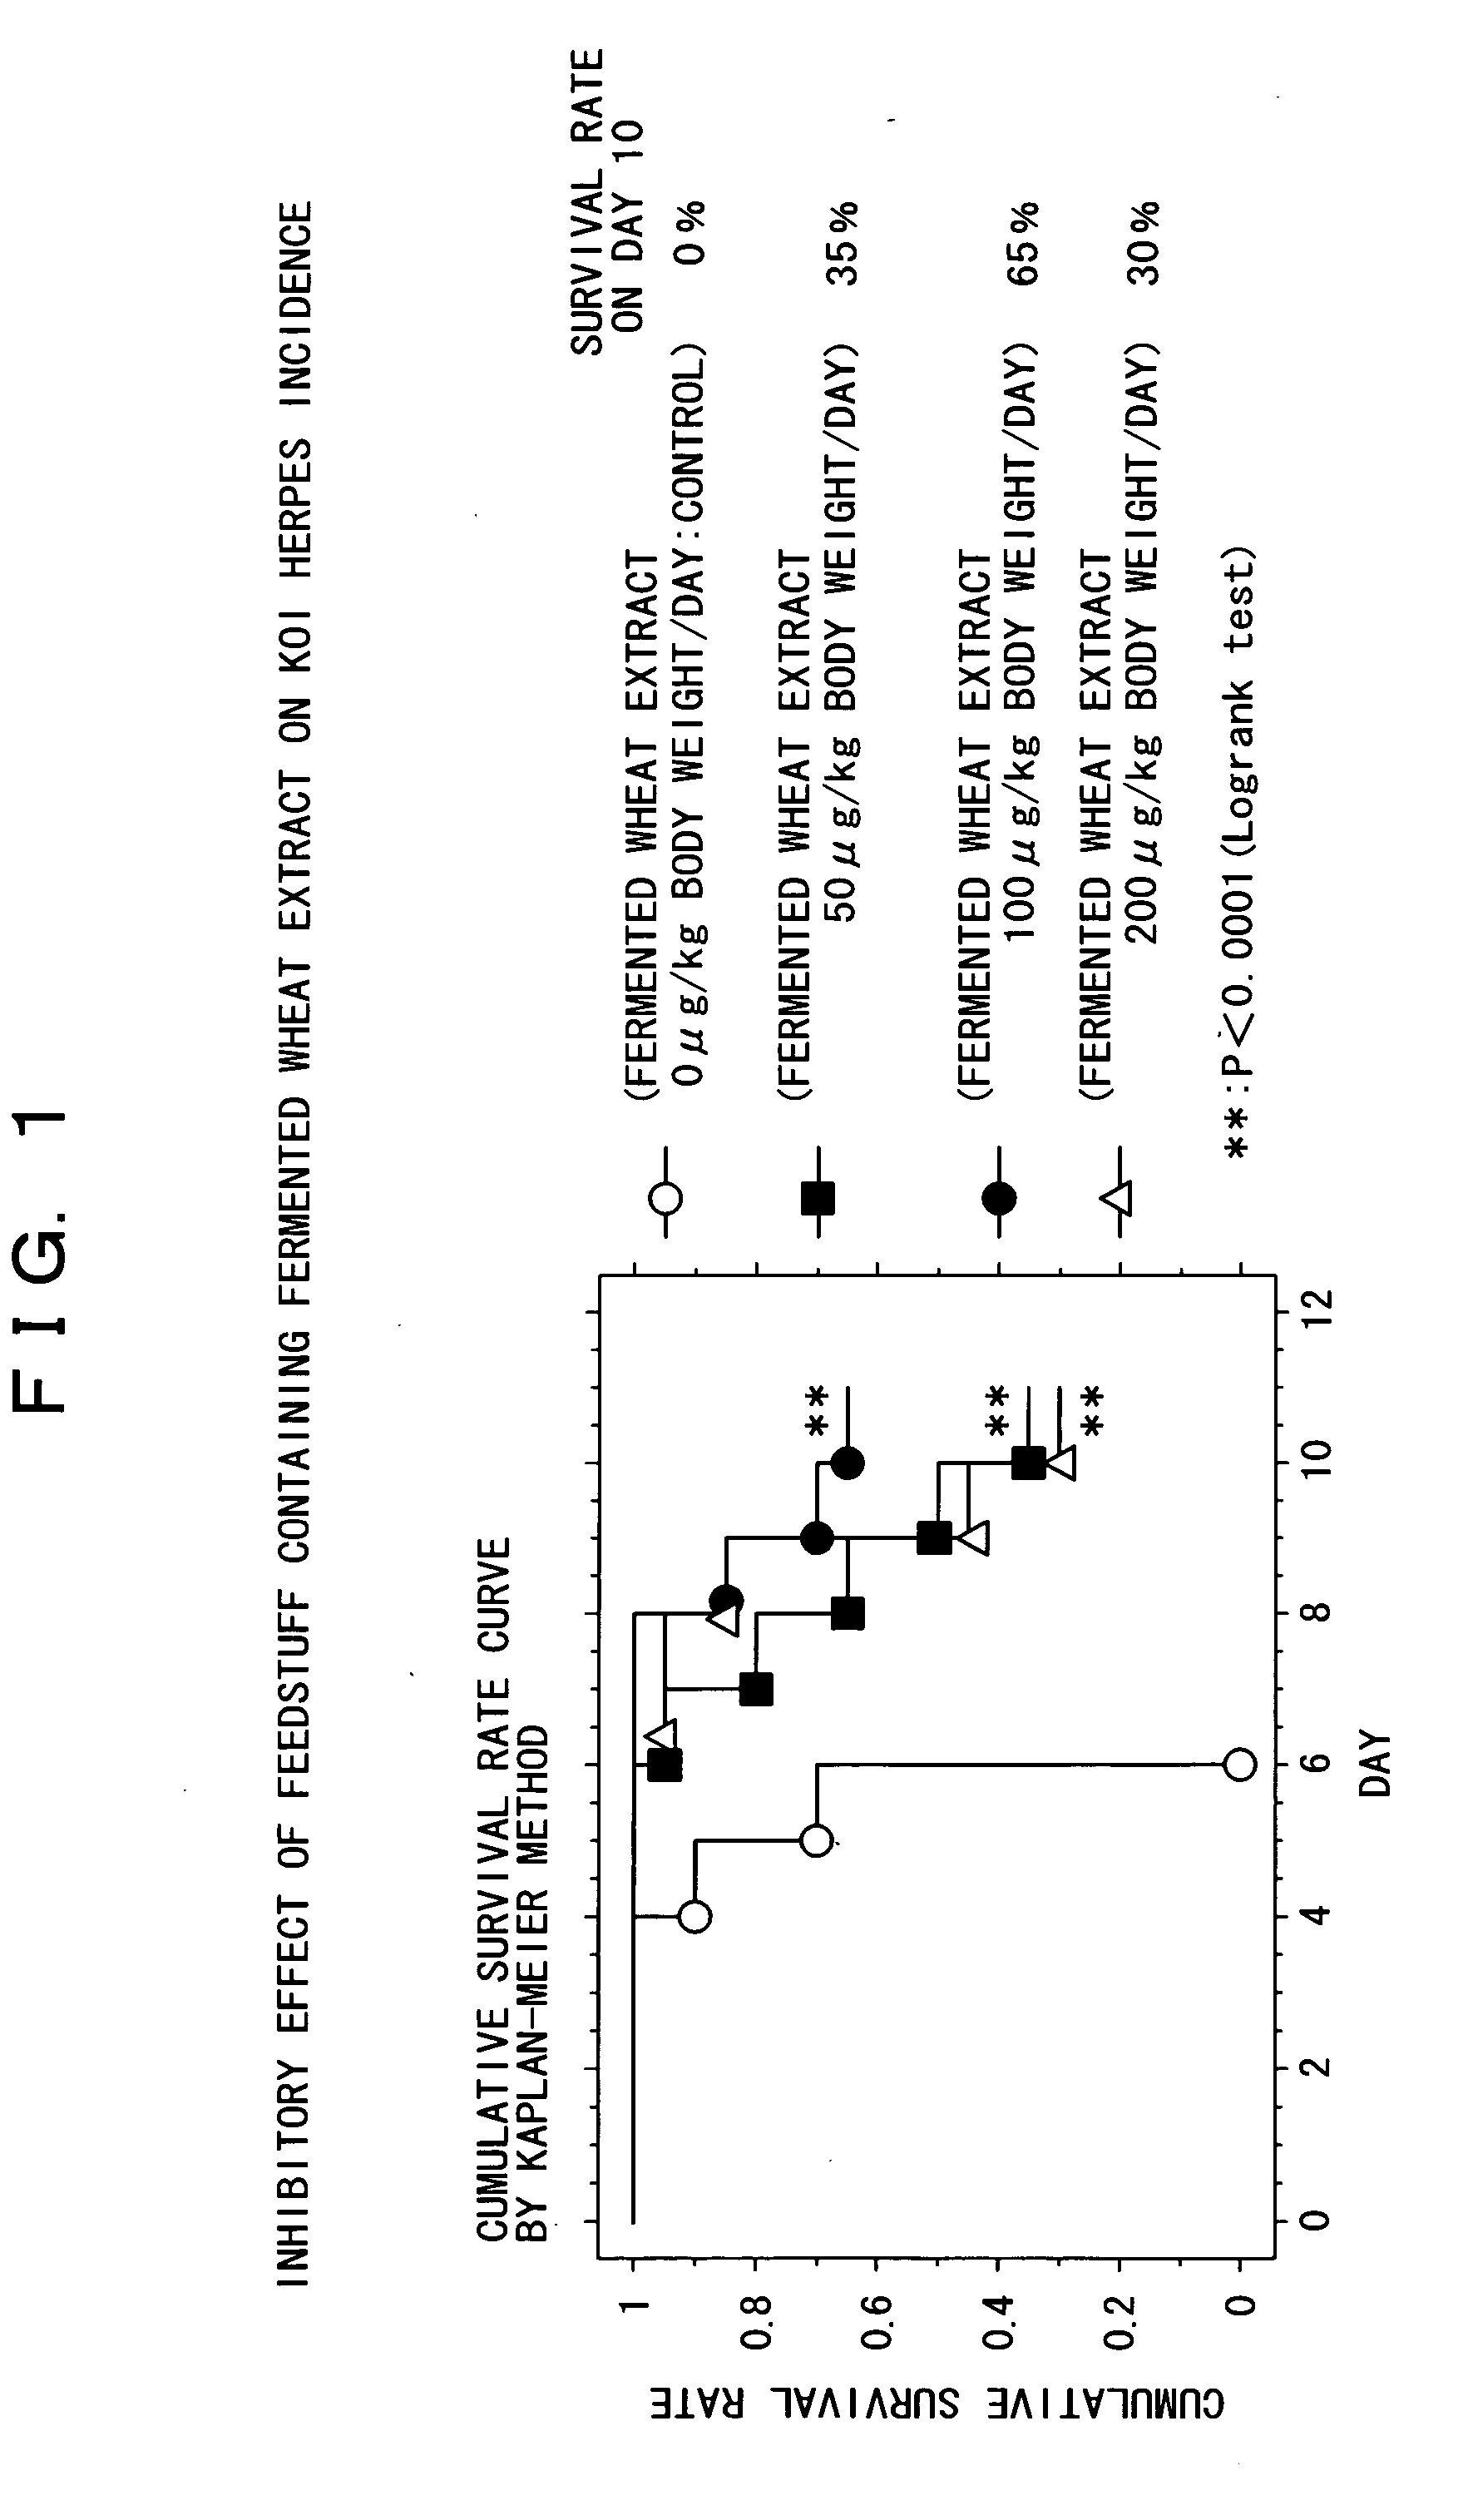 Method for fermentation and cultivation, fermented plant extract, fermented plant extract powder, and composition containing the extract of fermented plant